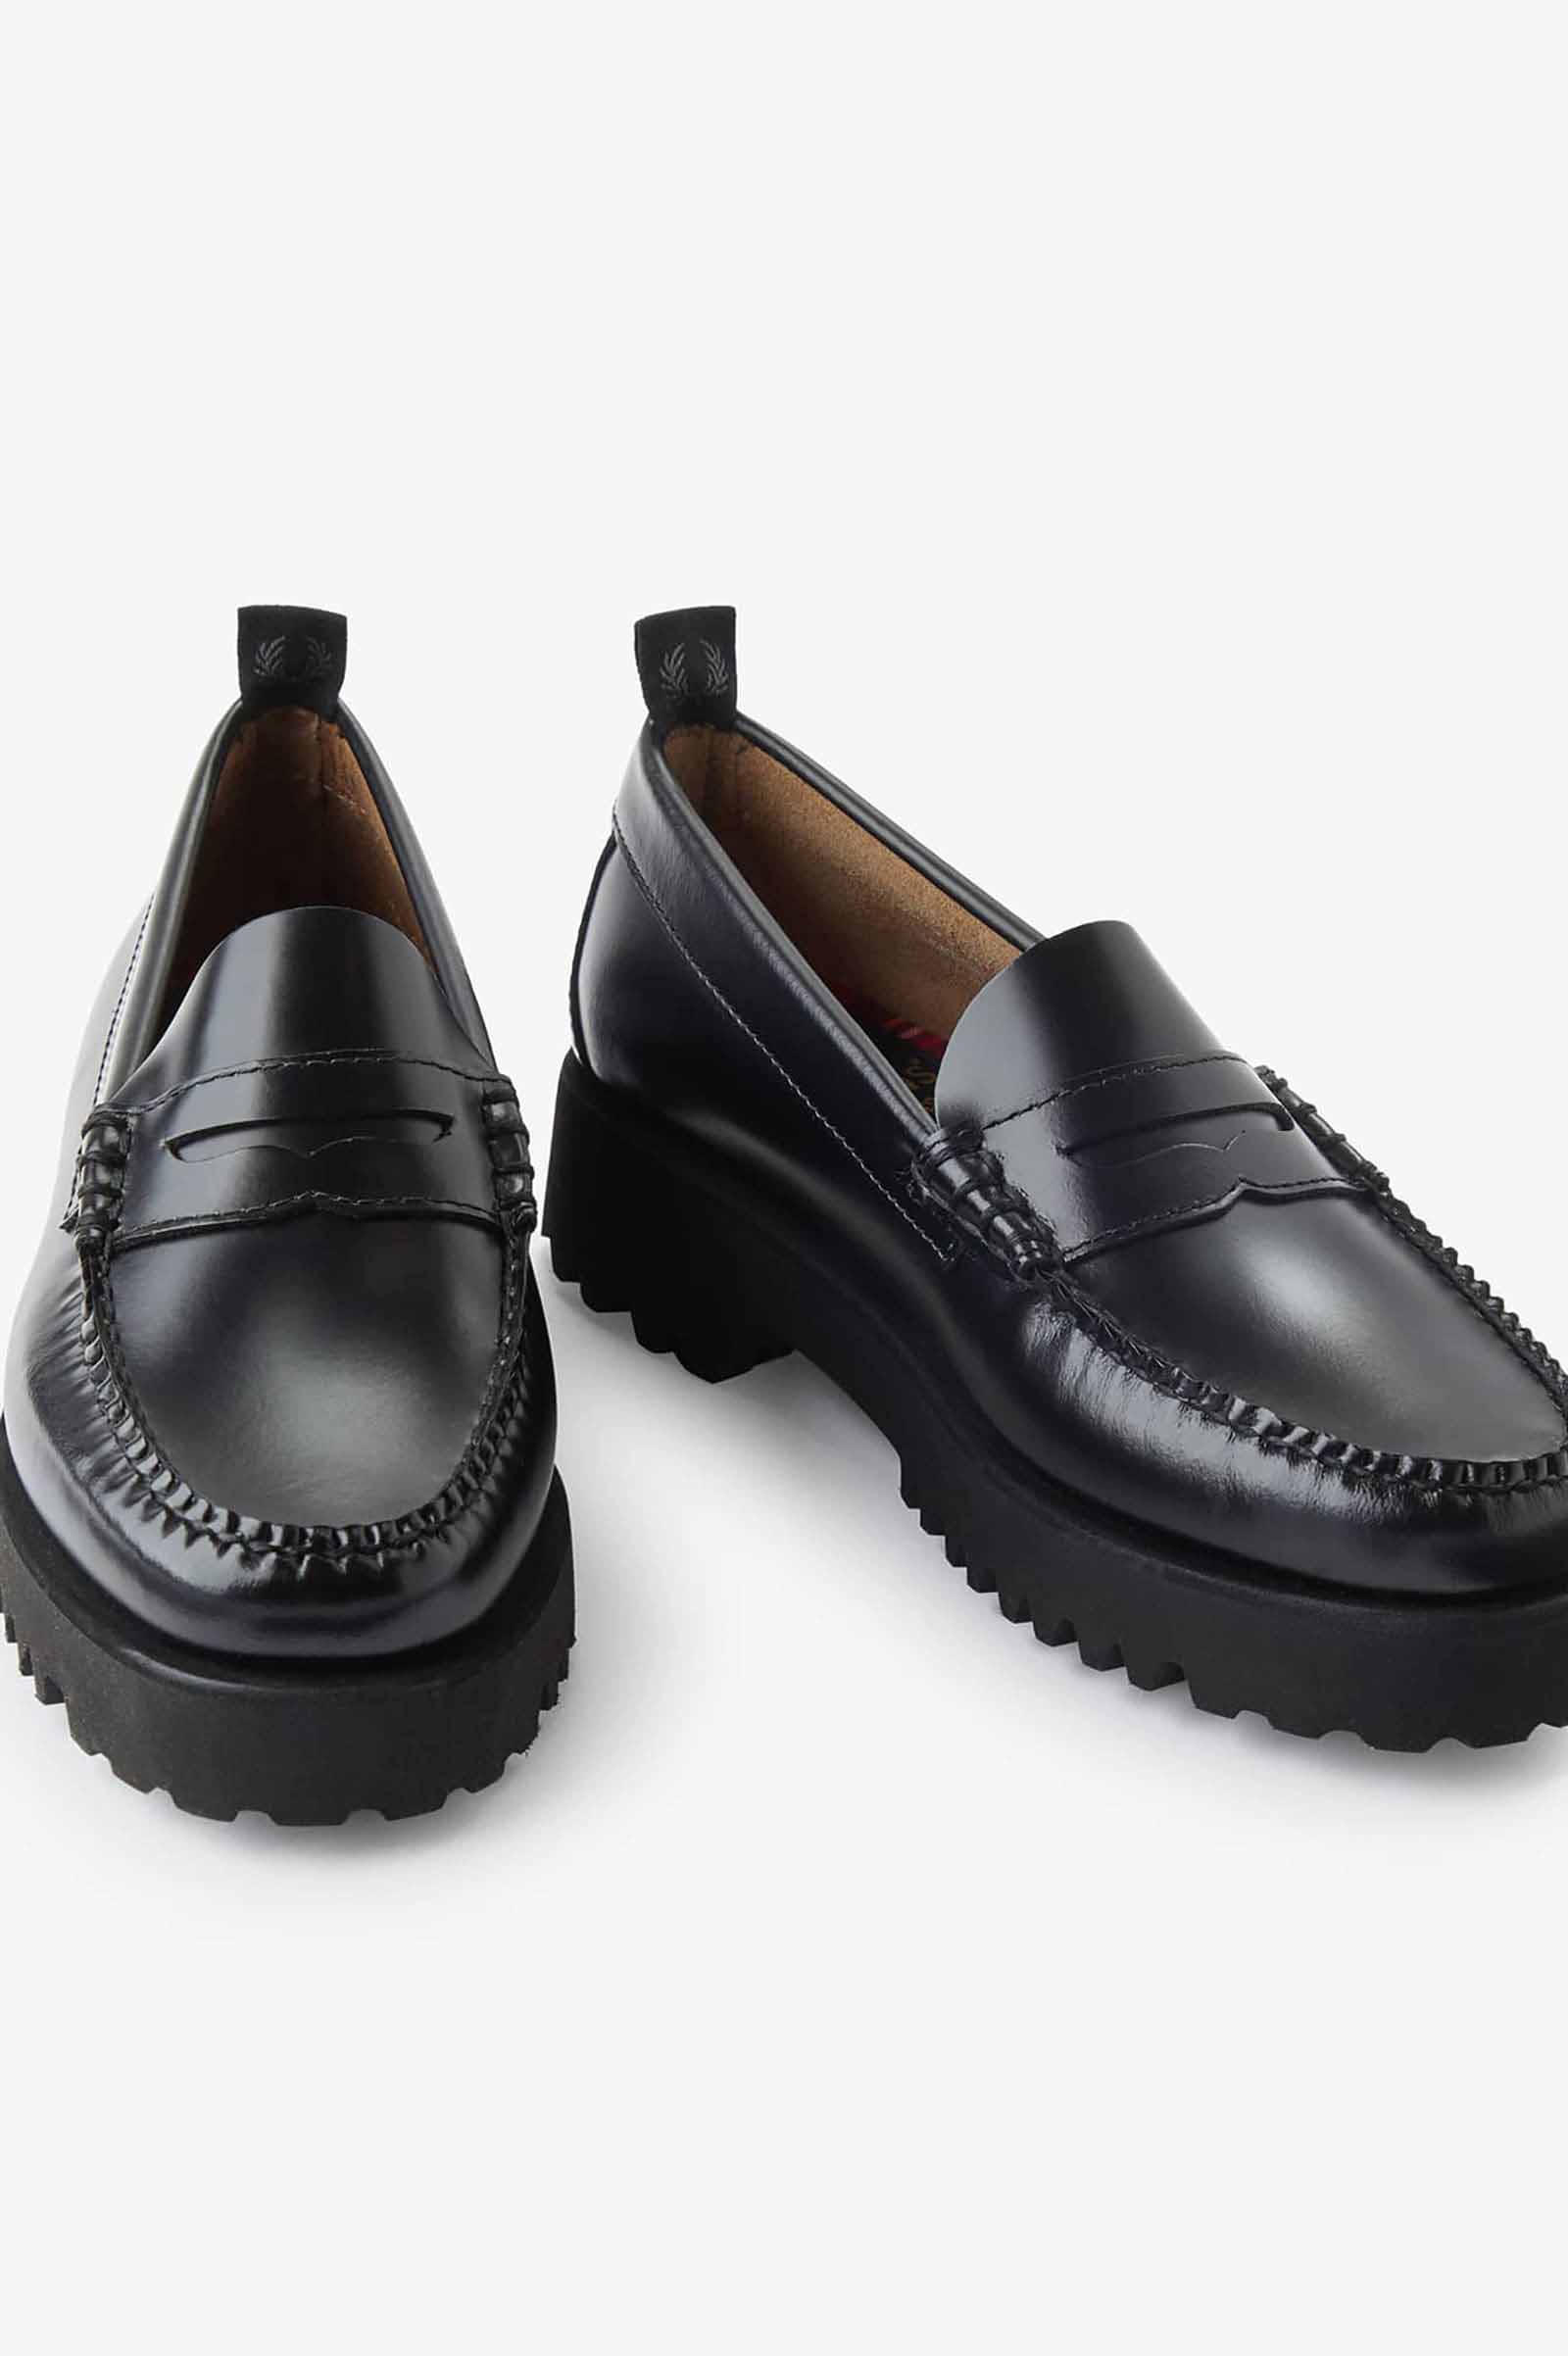 FRED PERRY PENNY LOAFER